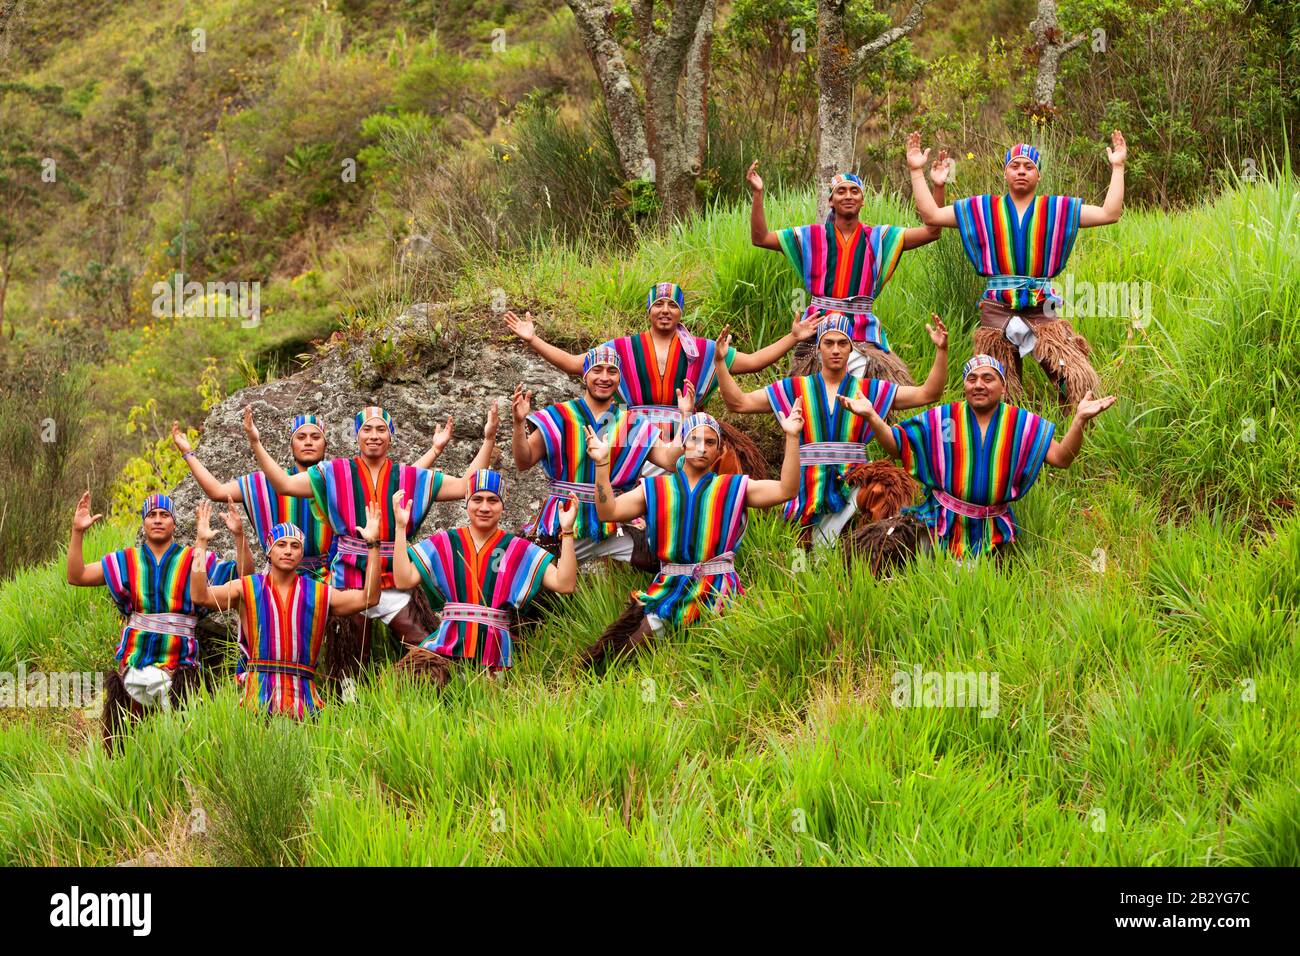 Ecuadorian Folkloric Gathering Dressed Up In Traditional Costumes Outside Shot Stock Photo